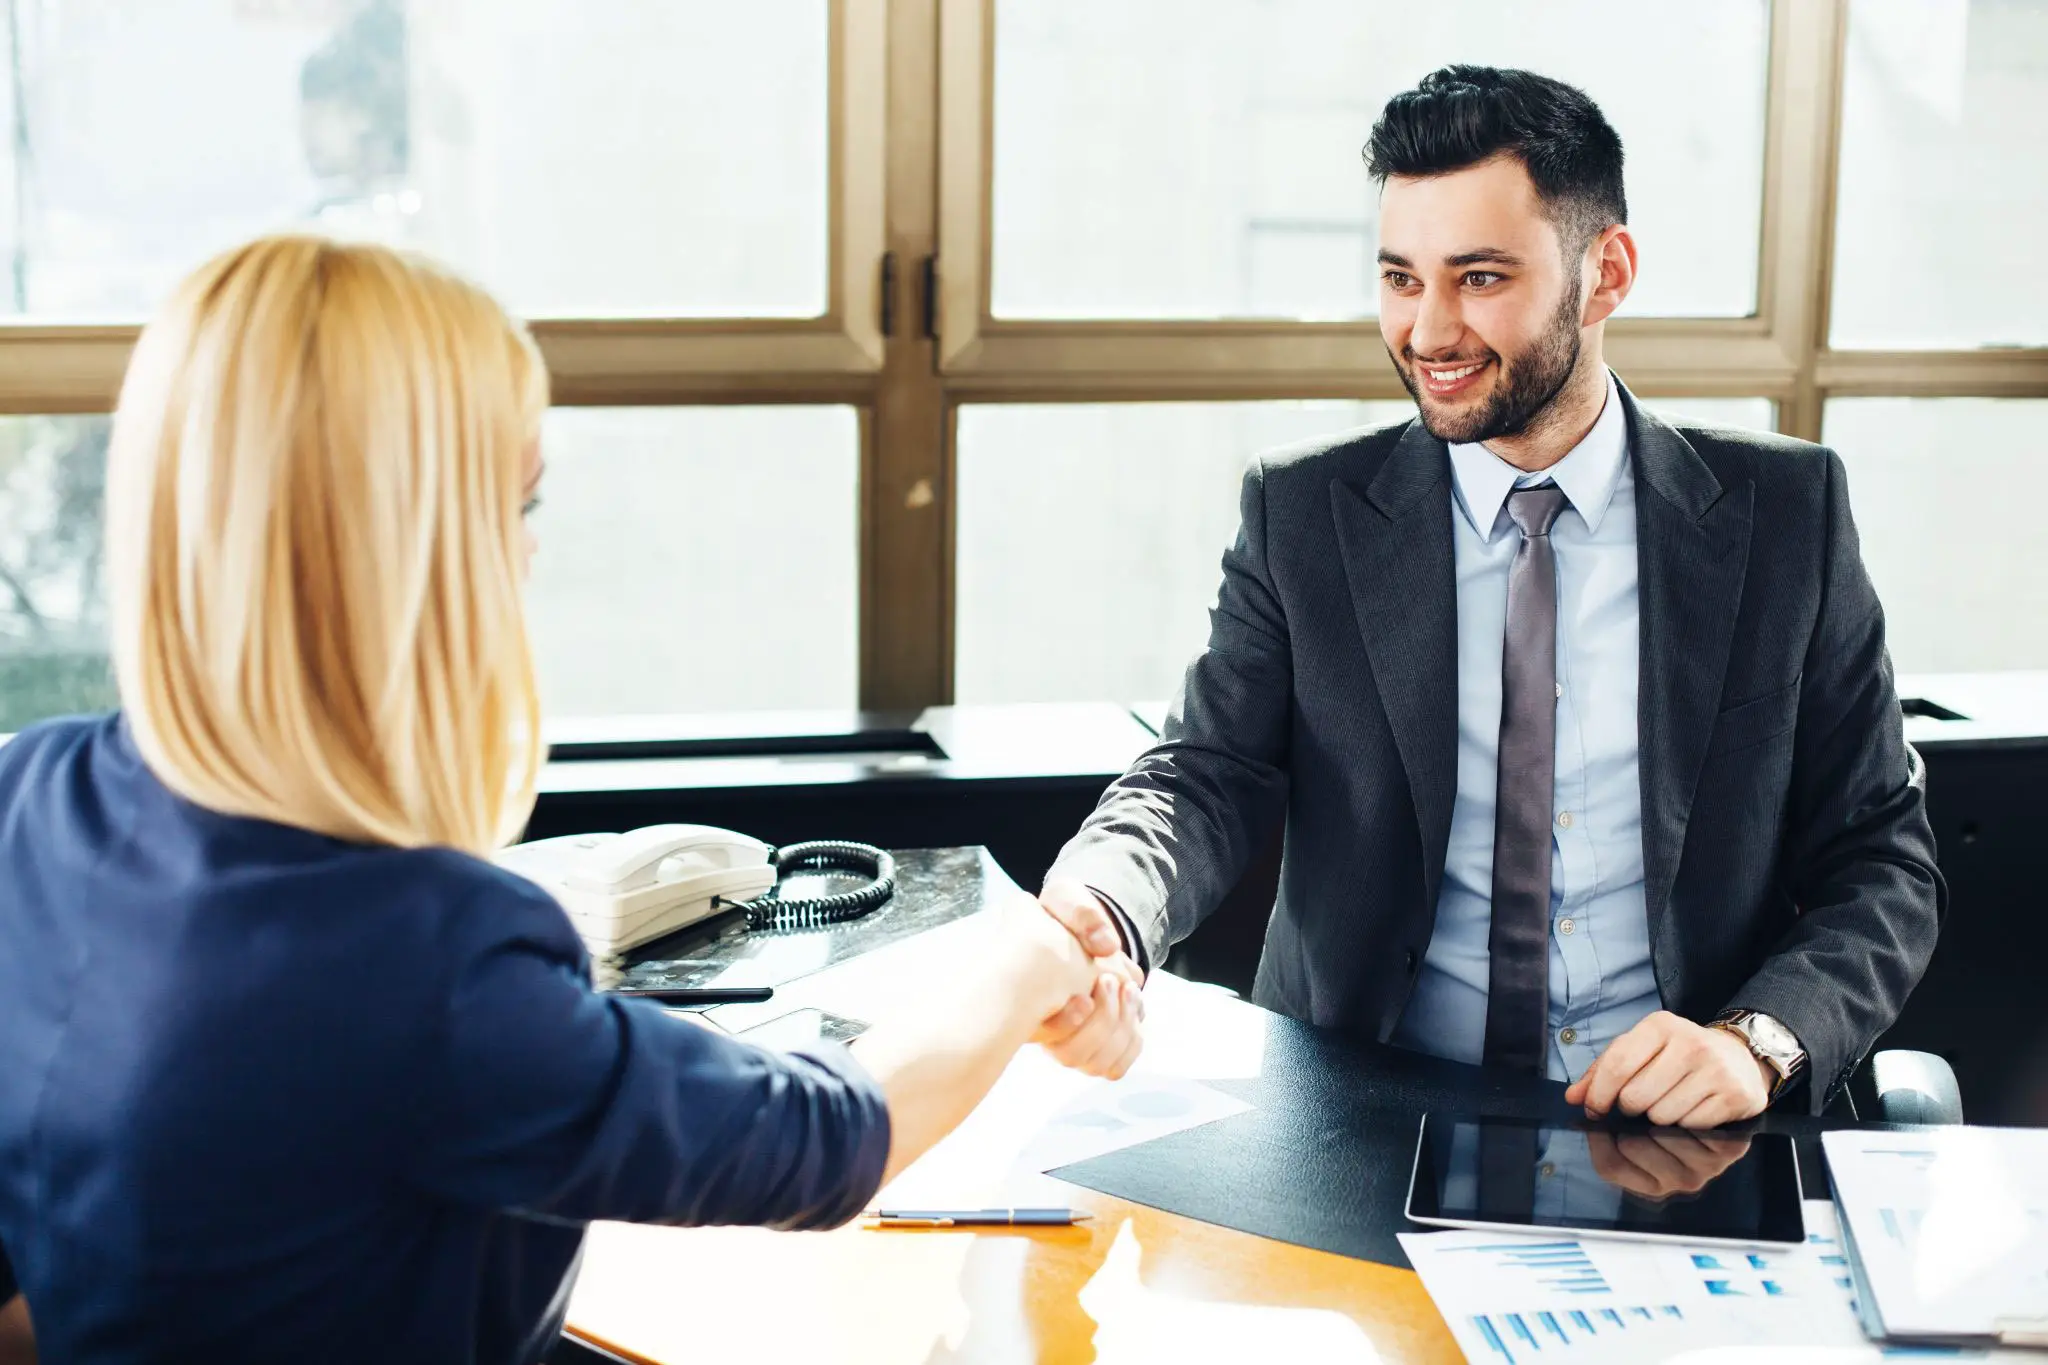 5 Steps To Nail Your Sales Job Interview